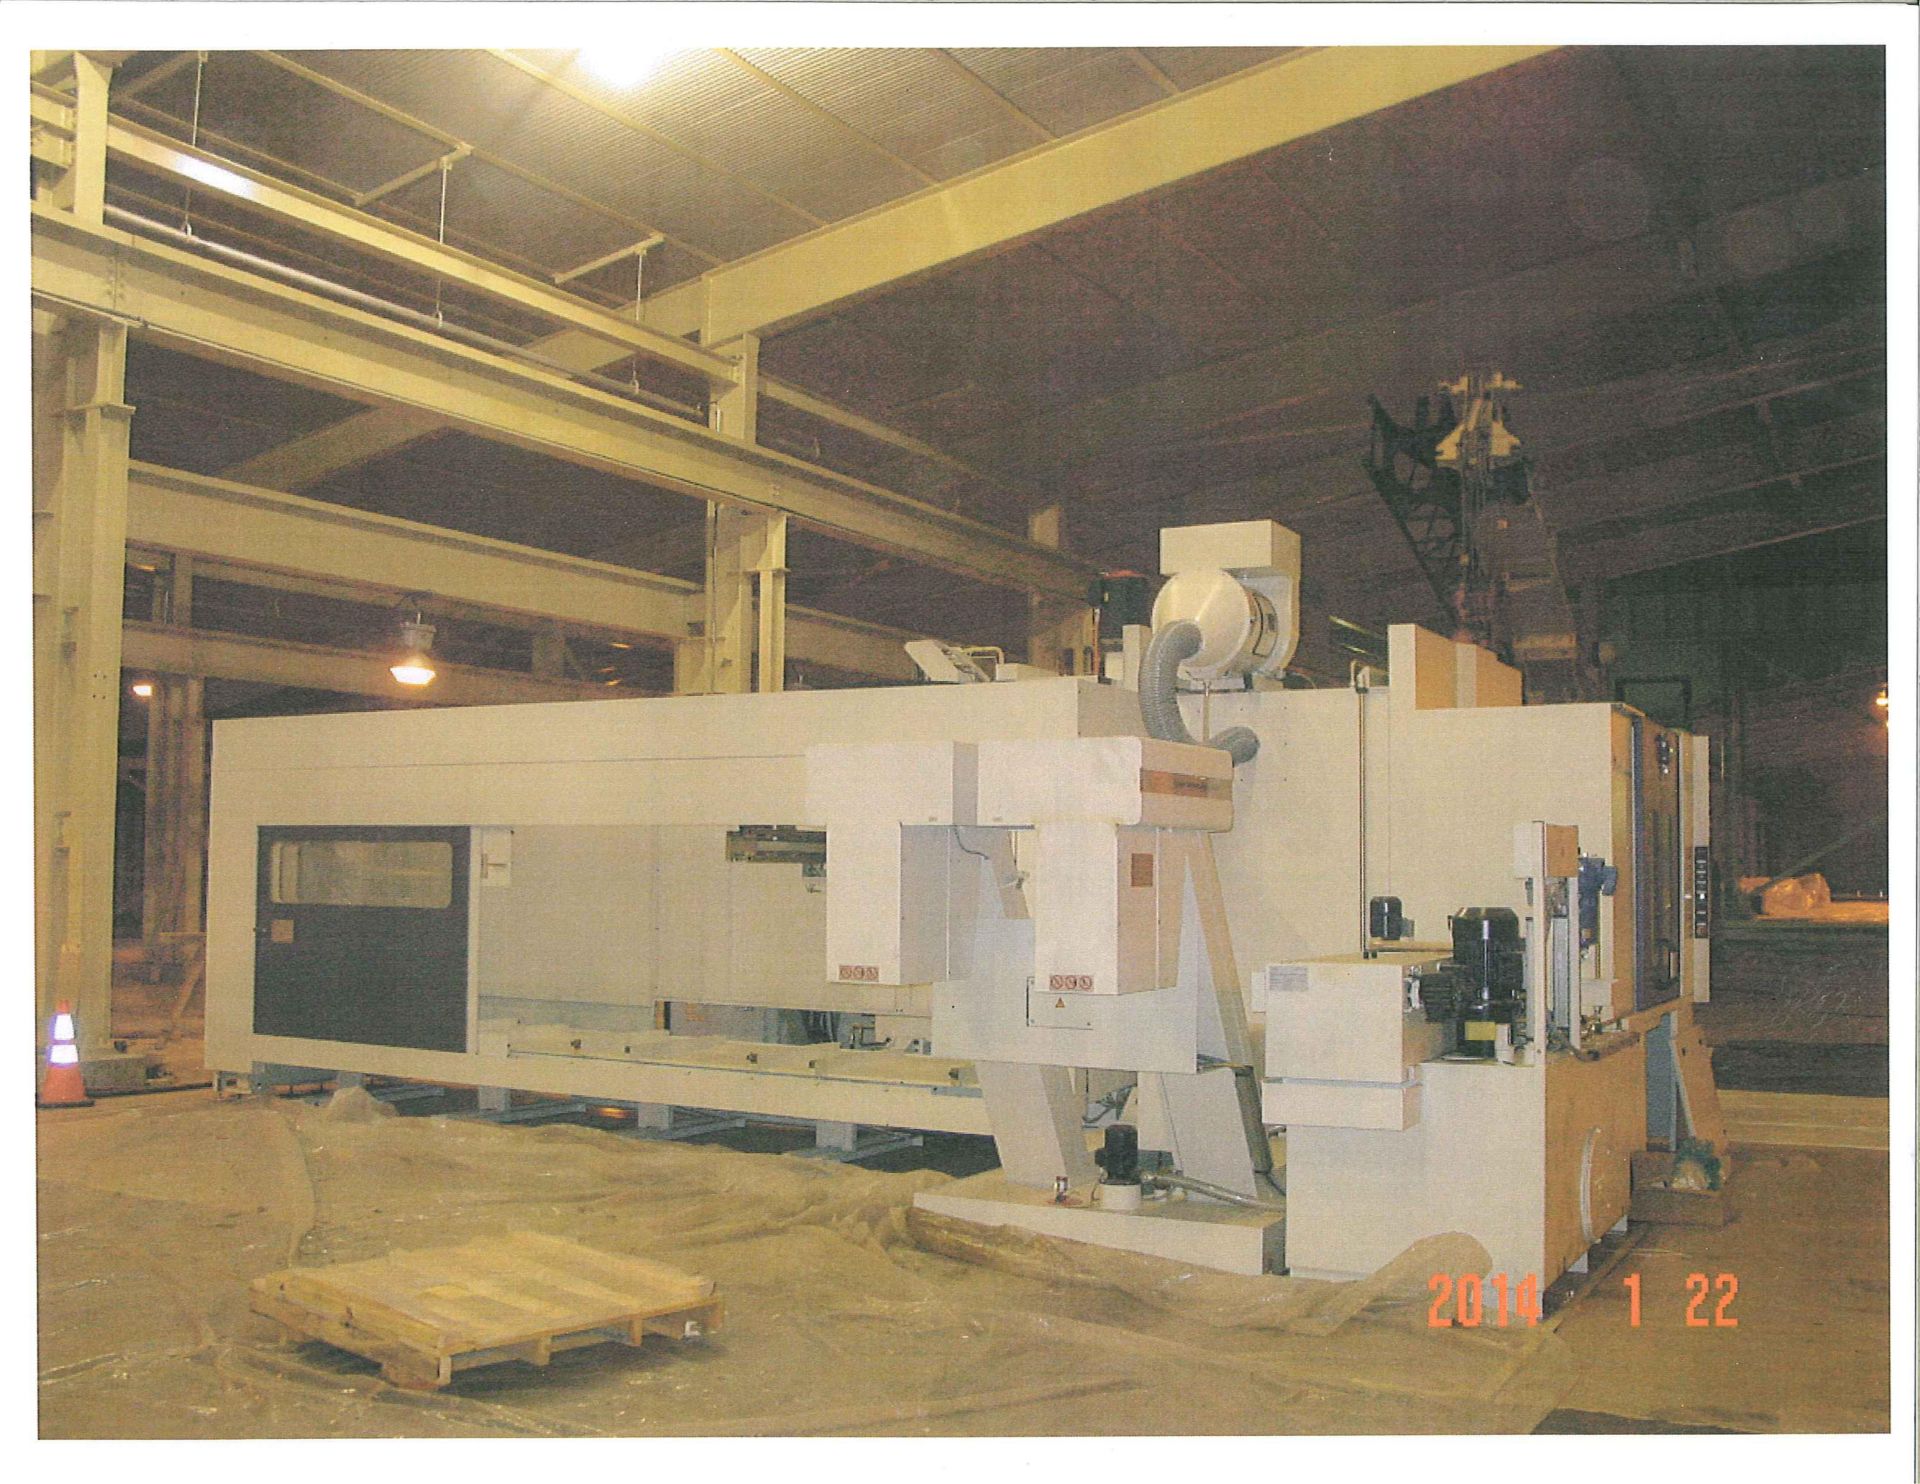 **GIDDINGS & LEWIS MODEL HMC-170 FOUR-AXIS TWO-PALLET CNC HORIZONTAL MACHINING CENTERS; S/N 491- - Image 5 of 36